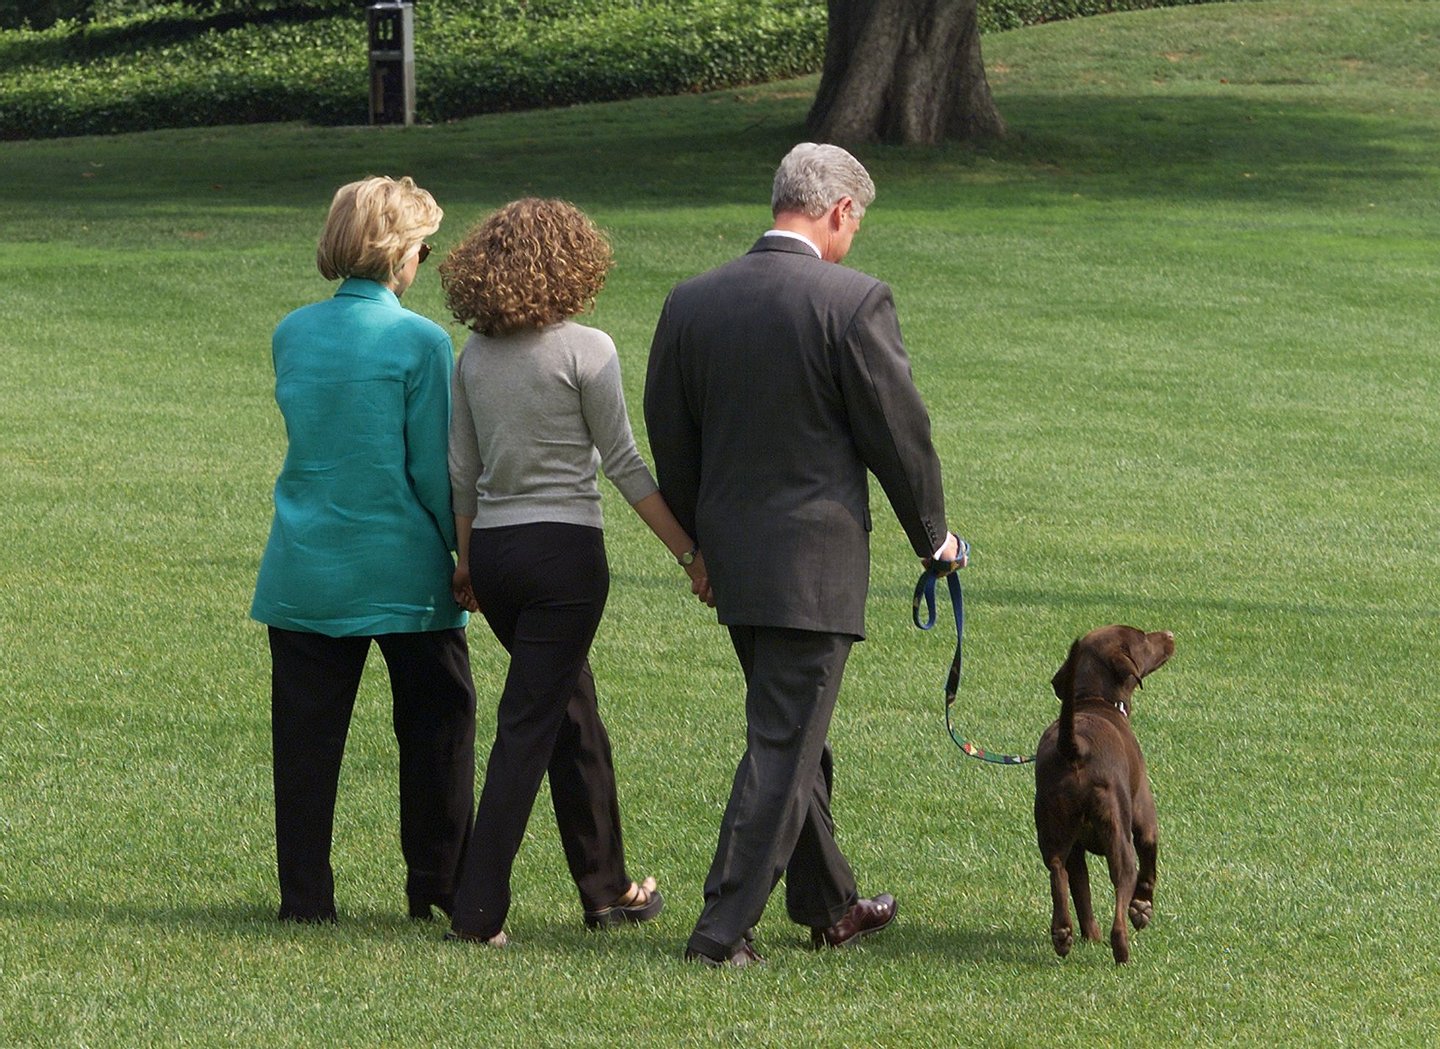 WASHINGTON, : US President Bill Clinton (R), First Lady Hillary Clinton (L), and their daughter Chelsea (C) depart 18 August the White House in Washington, DC, with their dog Buddy on their way to a two-week vacation in Martha's Vineyard, Massachusetts. Clinton gave a televised address 17 August to the American people from the White House regarding his testimony earlier 17 August to a federal grand jury in which he admitted to an improper relationship with former White House intern Monica Lewinsky. (ELECTRONIC IMAGE) AFP PHOTO Luke FRAZZA (Photo credit should read LUKE FRAZZA/AFP/Getty Images)